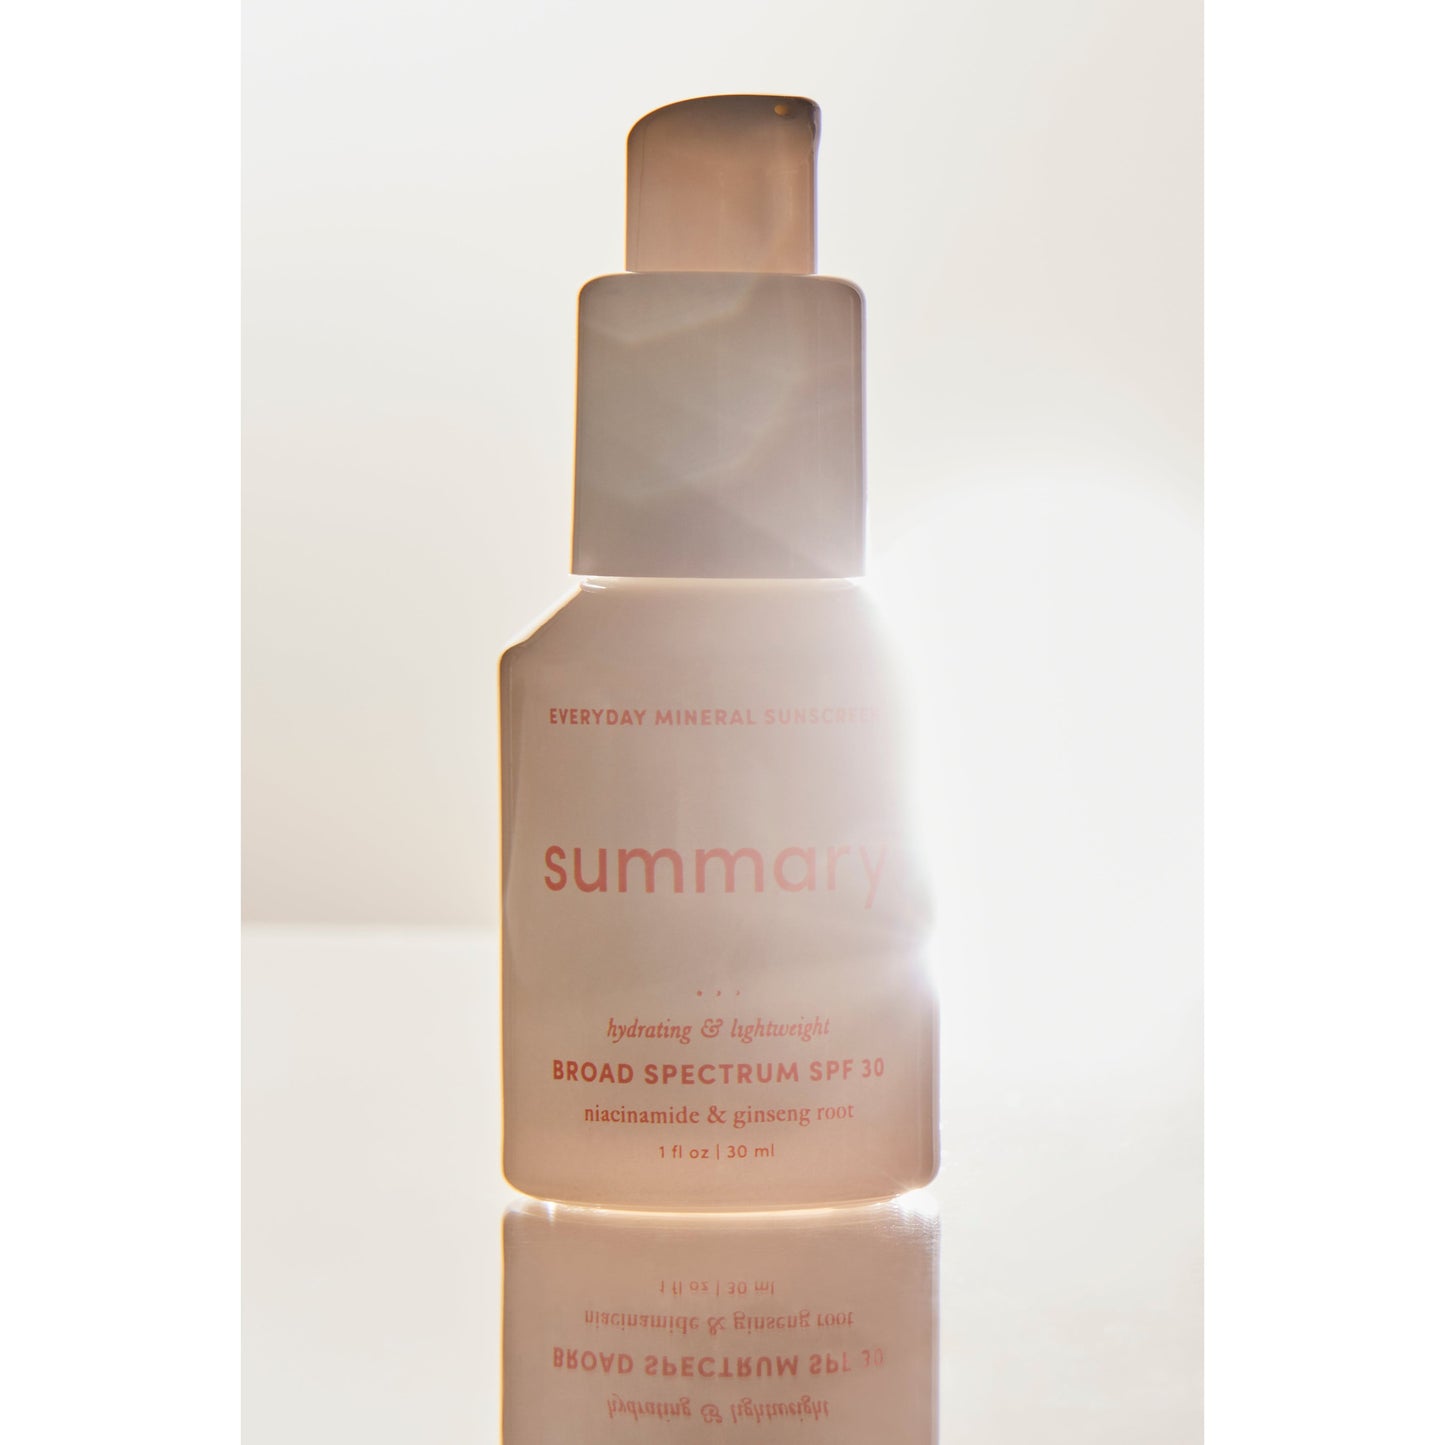 A bottle of Free People Movement's Summary SPF 30 mineral-based sunscreen backlit by sunlight, emphasizing its hydrating and lightweight formula.